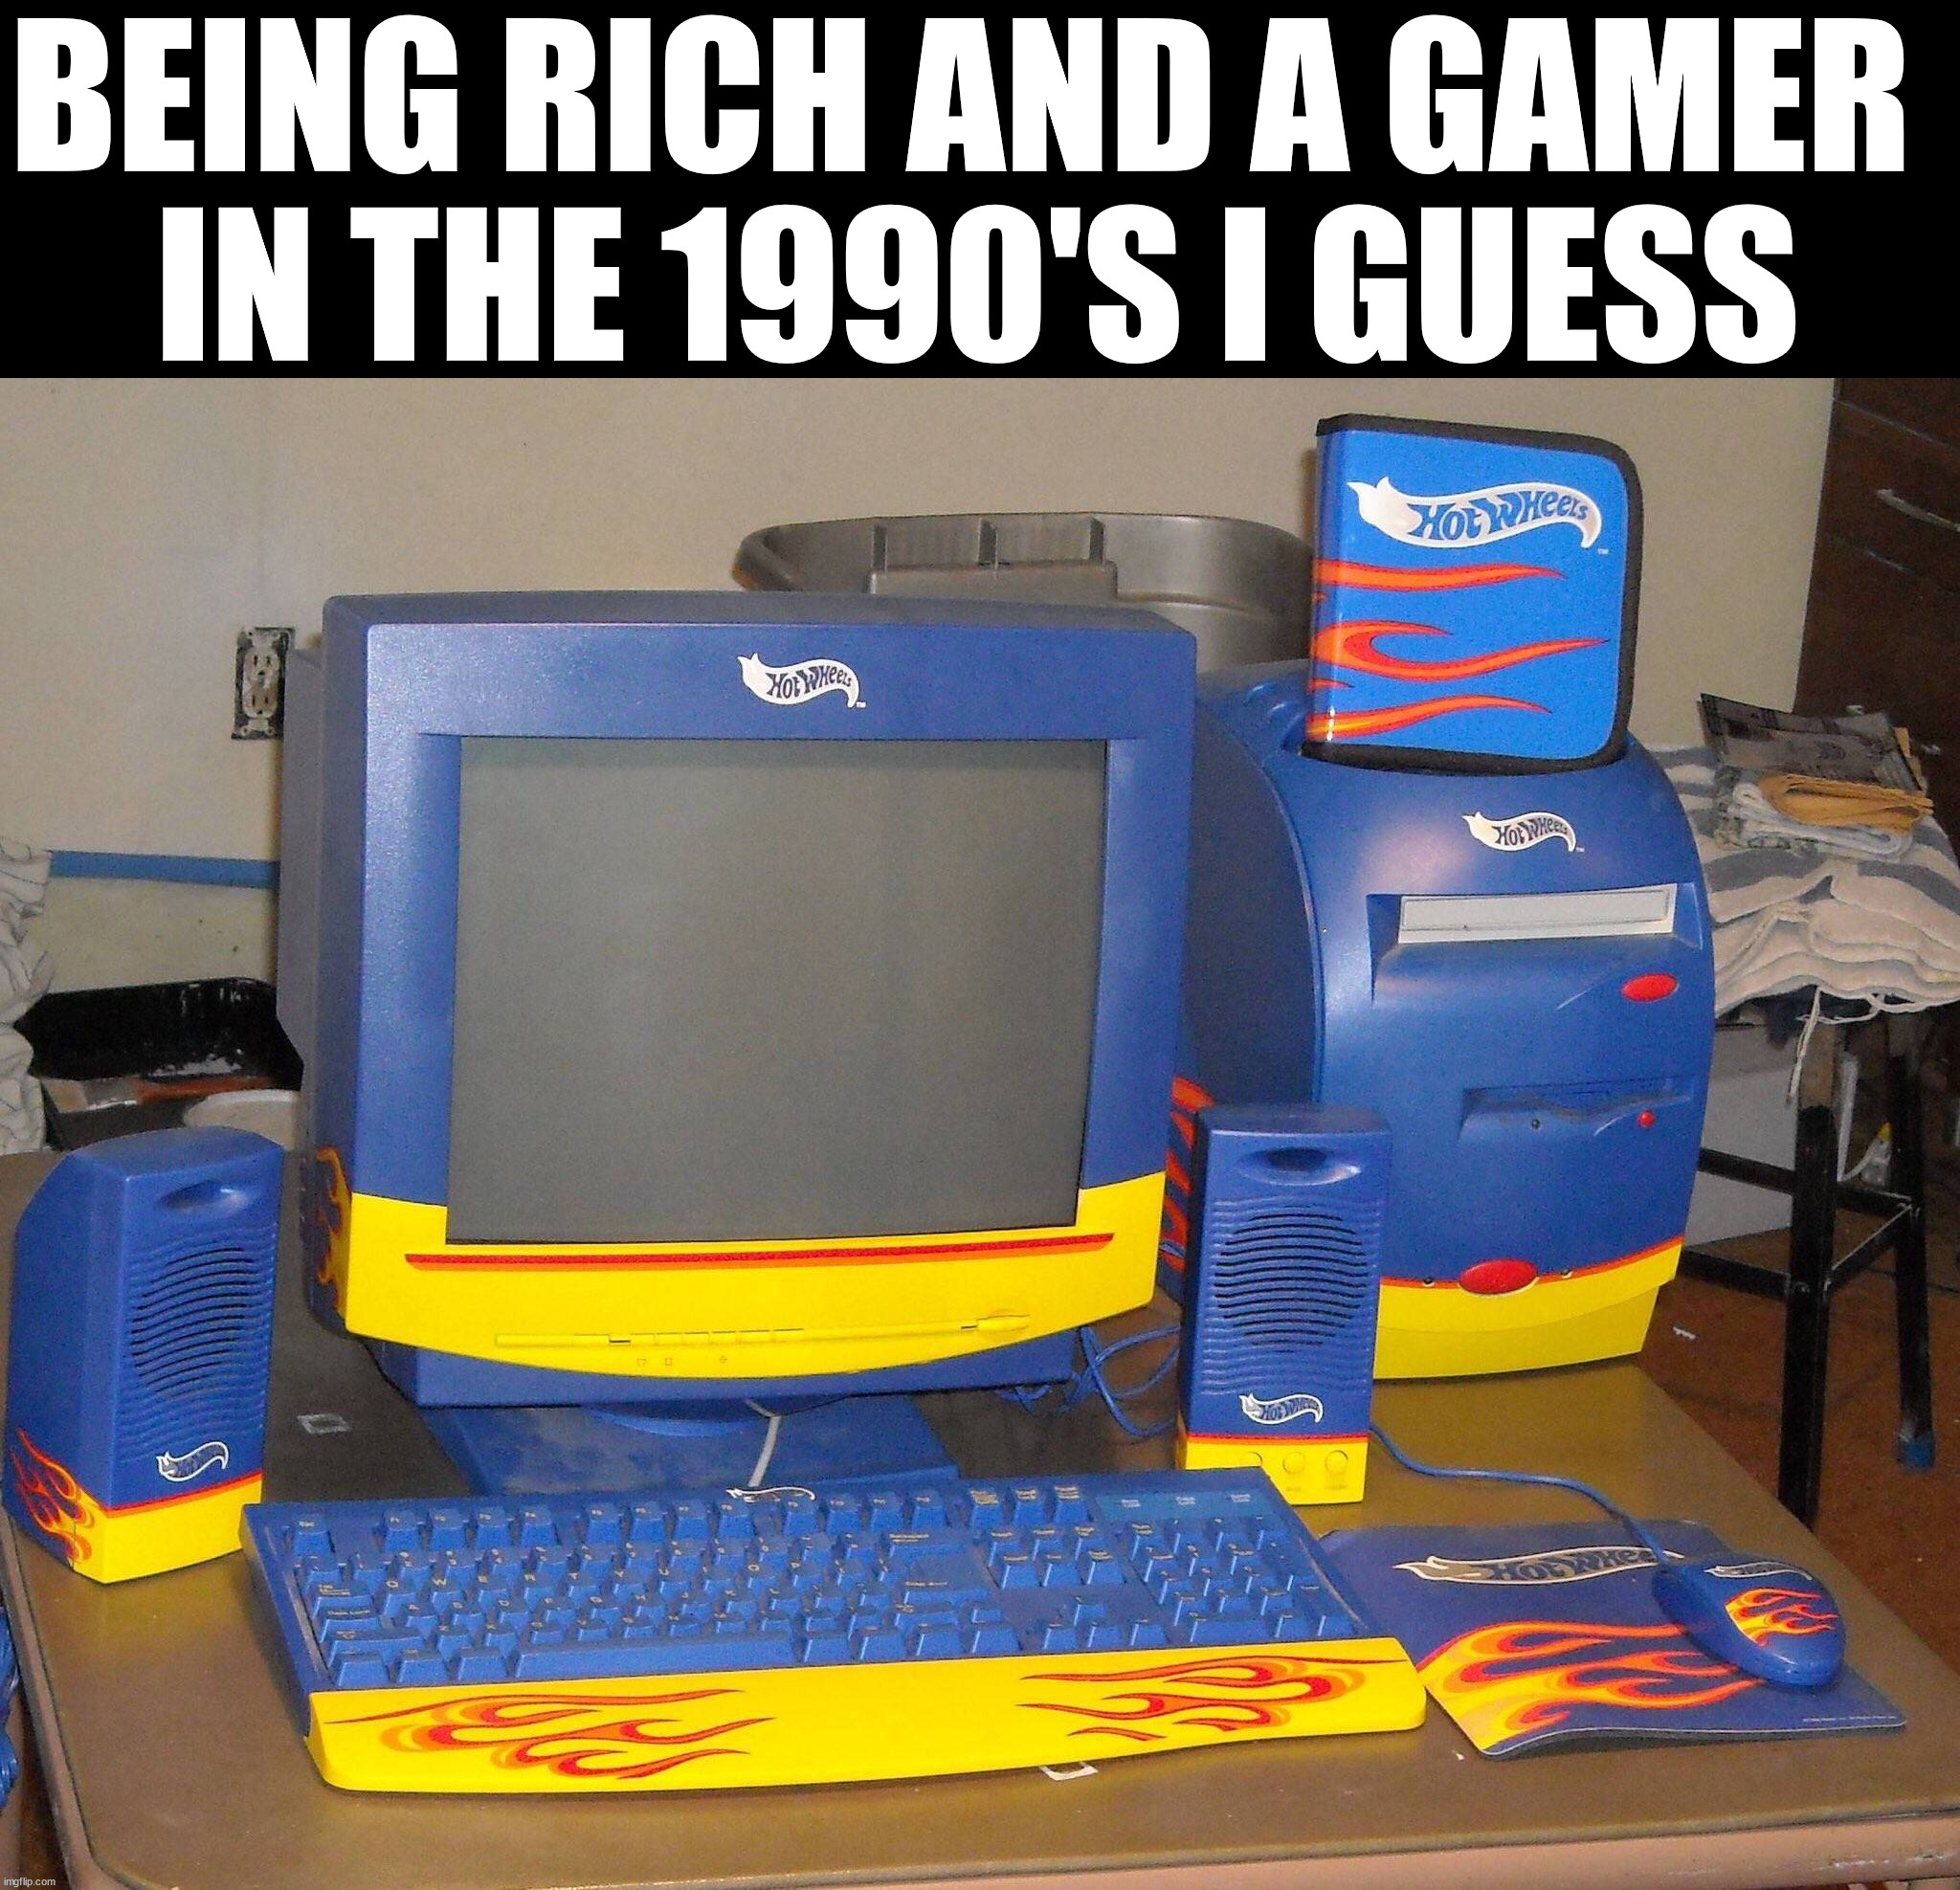 It is actually kinda cool | BEING RICH AND A GAMER 
IN THE 1990'S I GUESS | image tagged in gaming,hot wheels | made w/ Imgflip meme maker